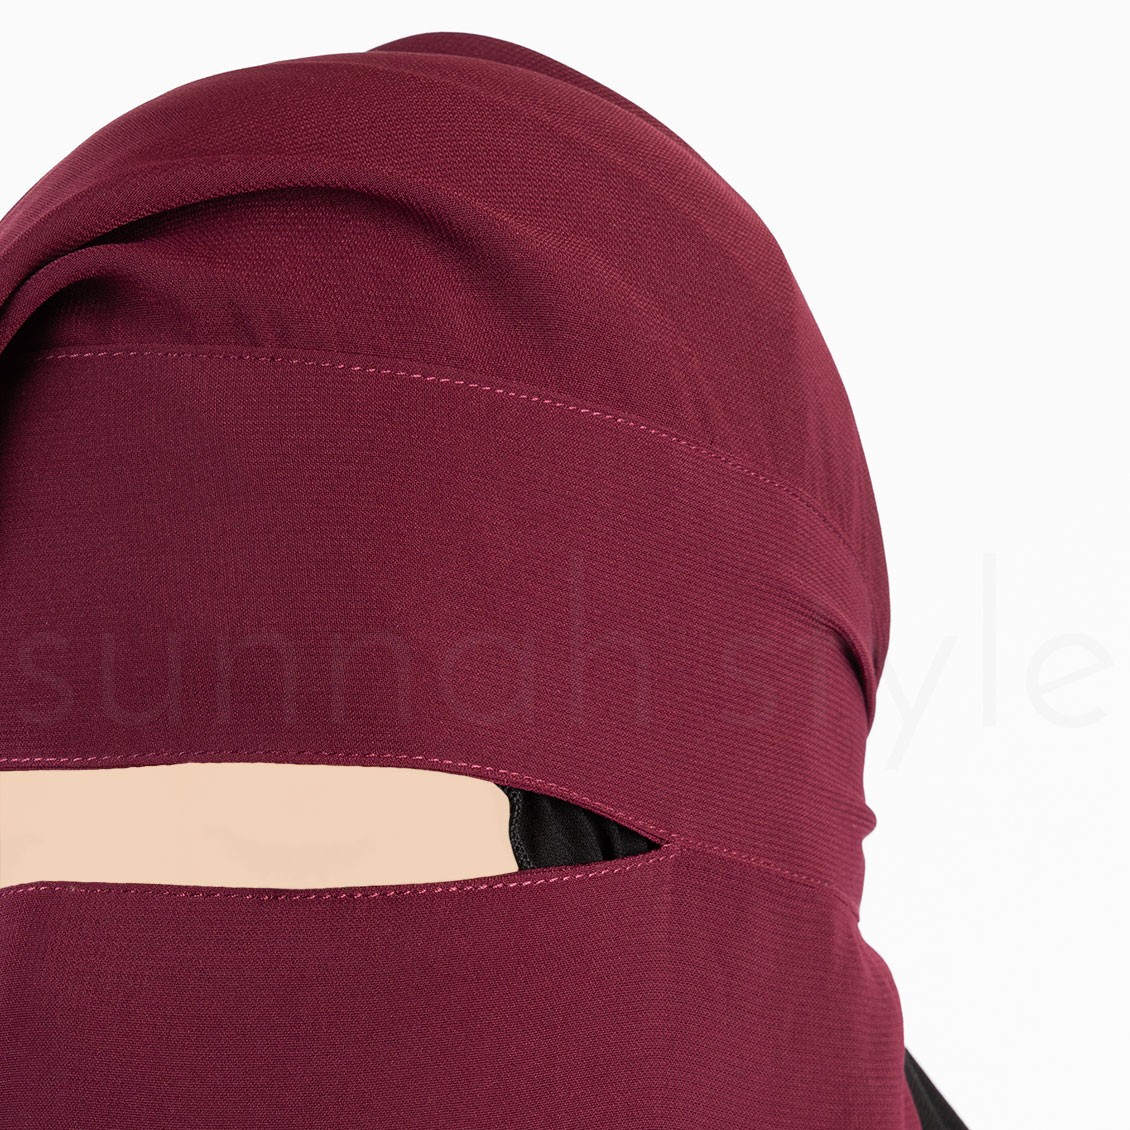 Sunnah Style Two Layer Niqab Burgundy